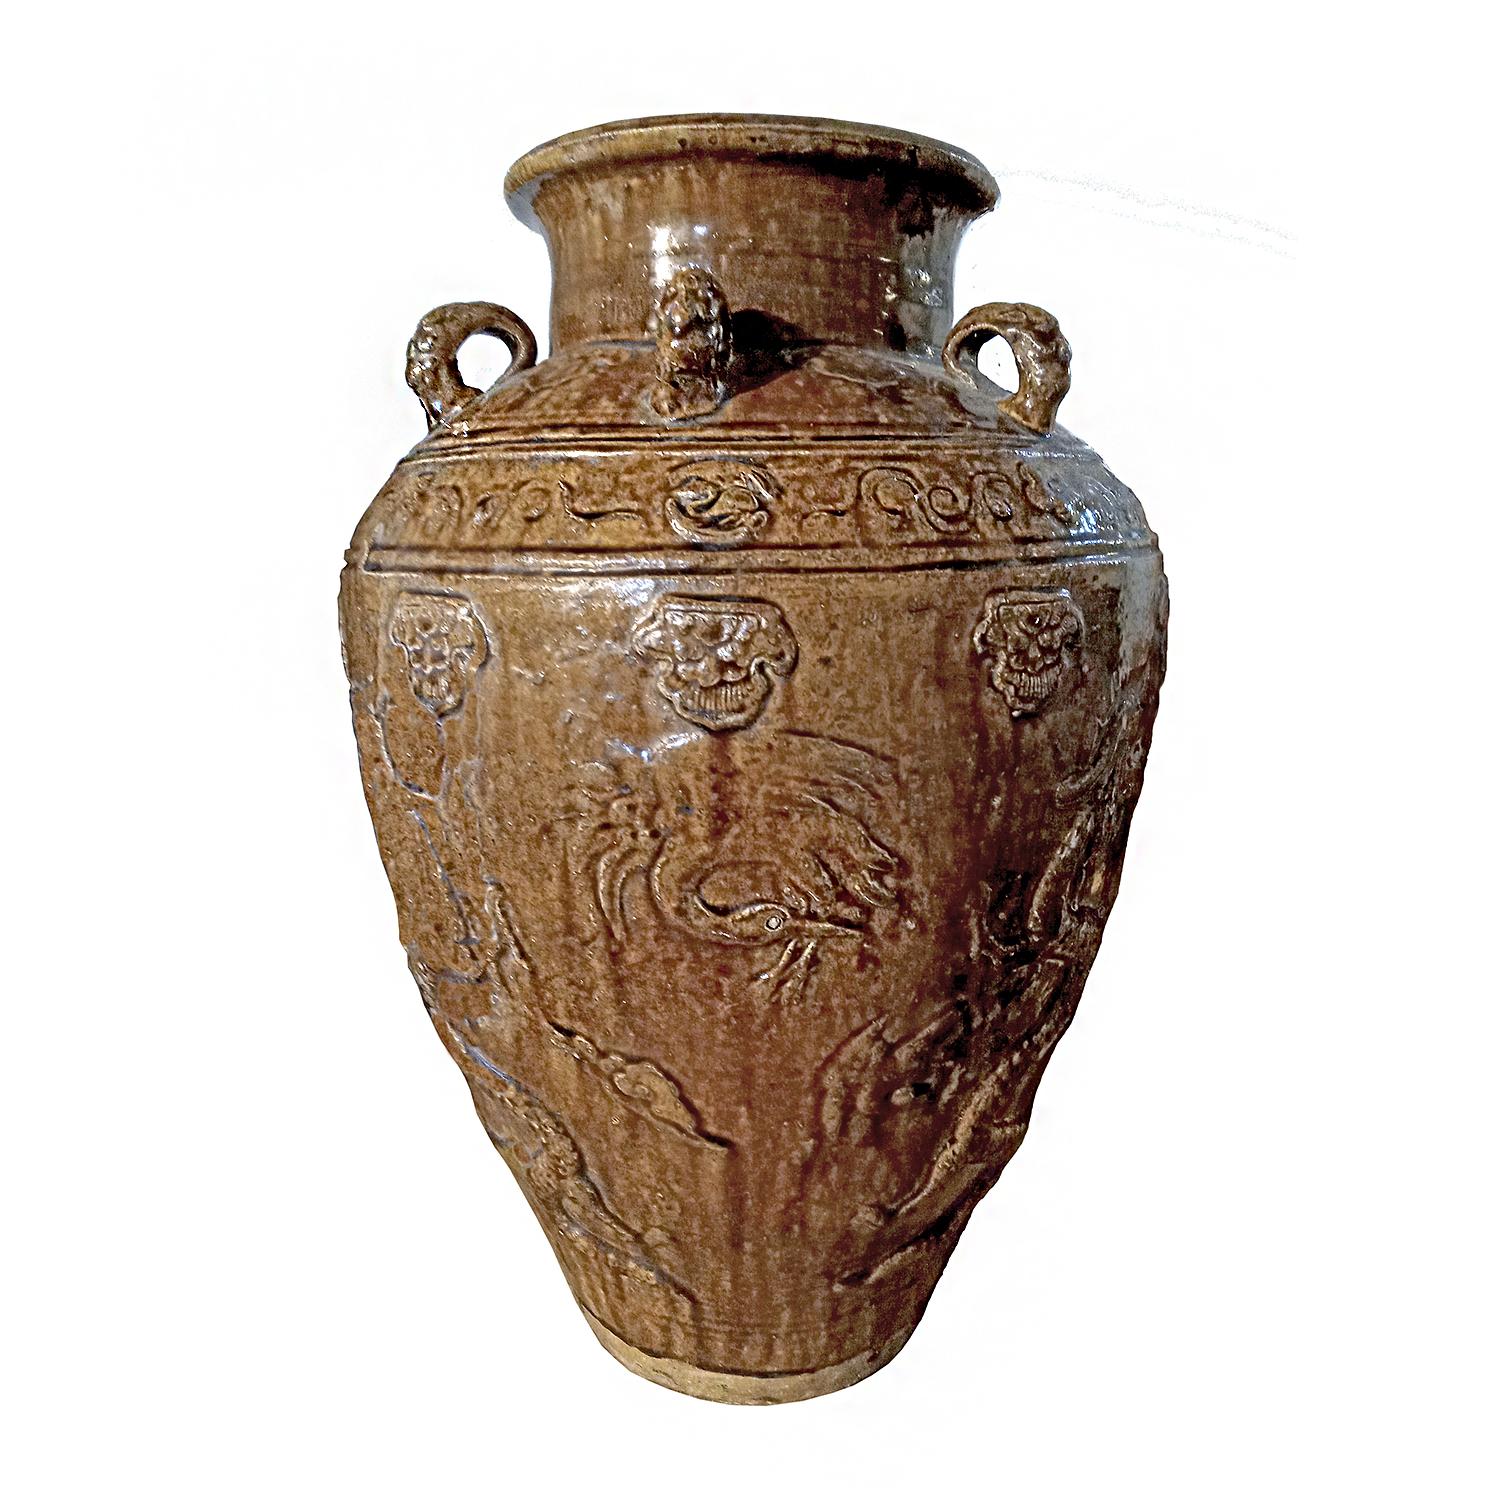 Late 20th Century Indonesian Terracotta Urn / Jar / Vase with Brown Glaze and Dragon Motif For Sale